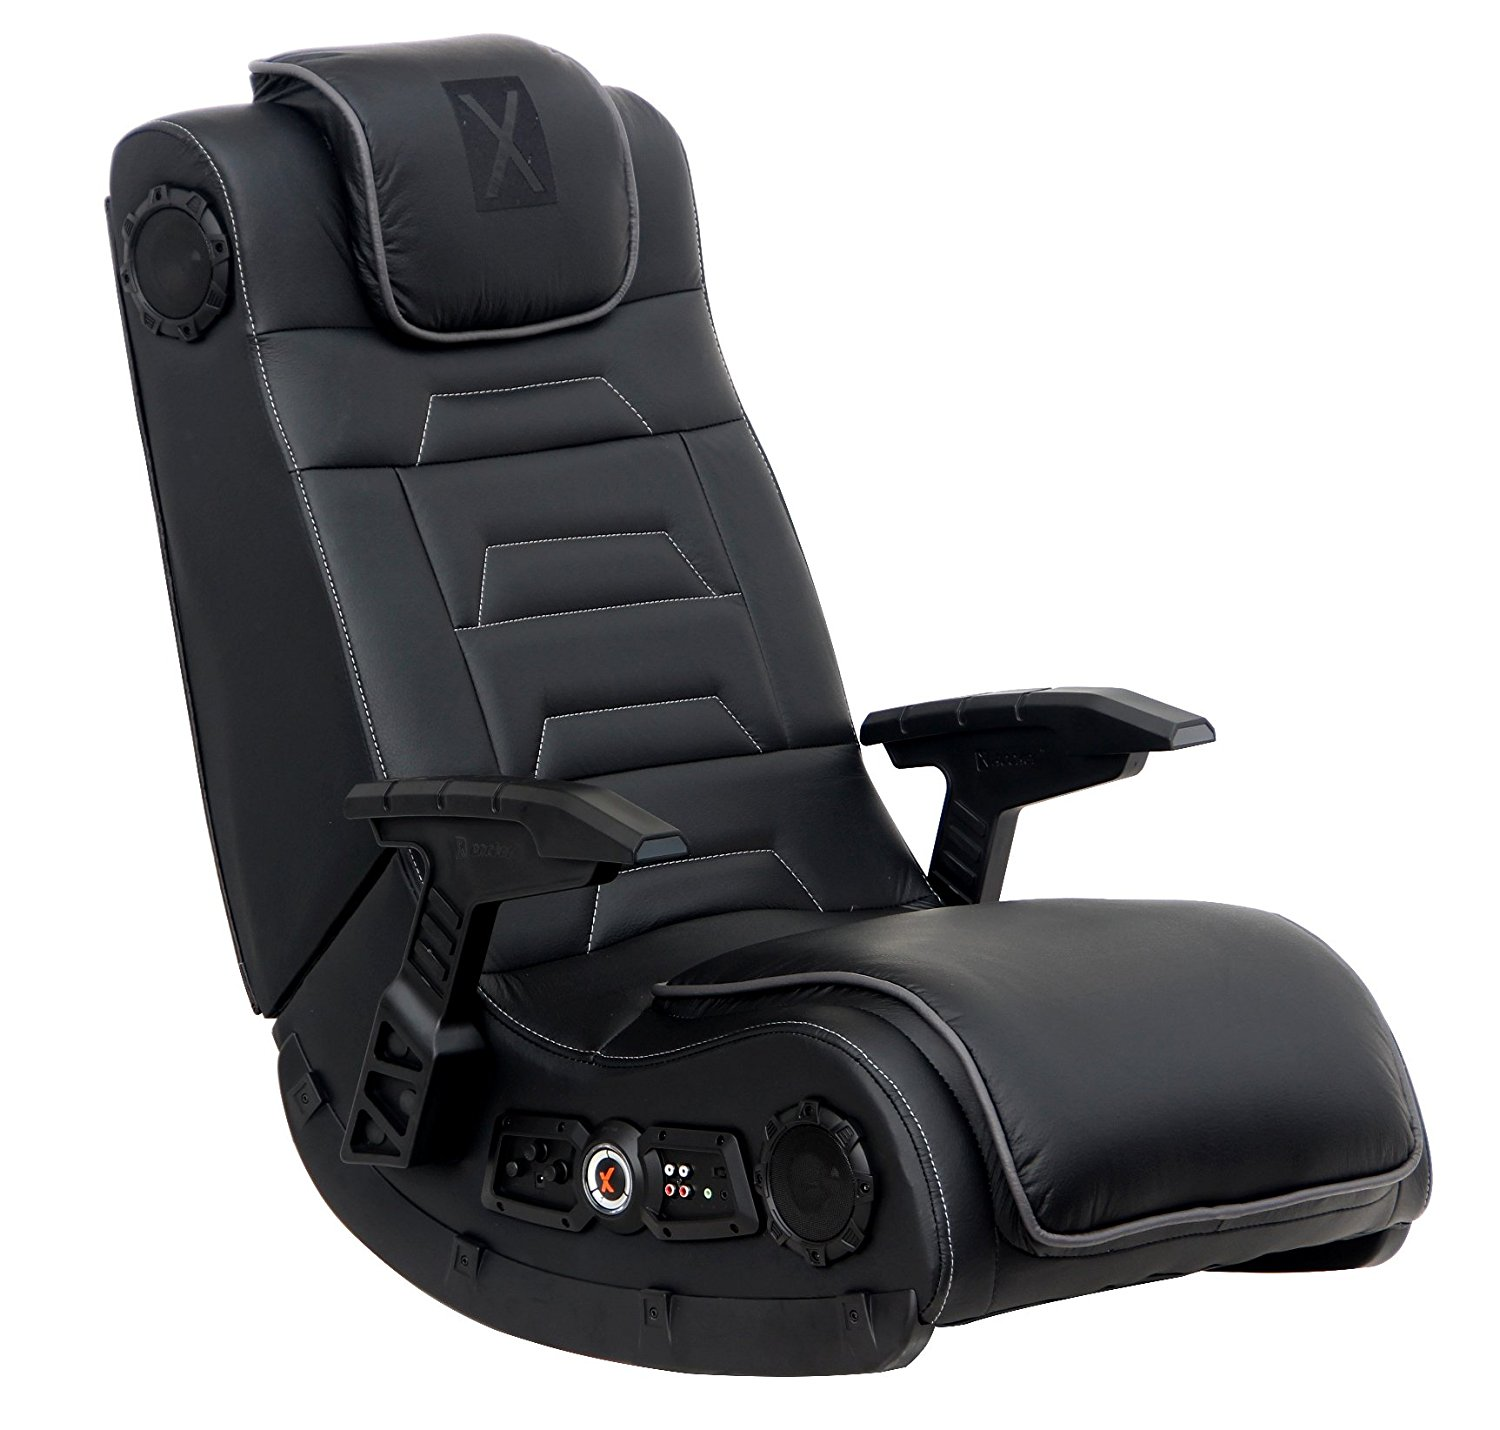 A comfy chair with audio inputs can make your gaming experience just that much more chill.<br><br>Relax harder <a href="https://amzn.to/2ITmI9i" target="_blank" "nofollow">here</a>.